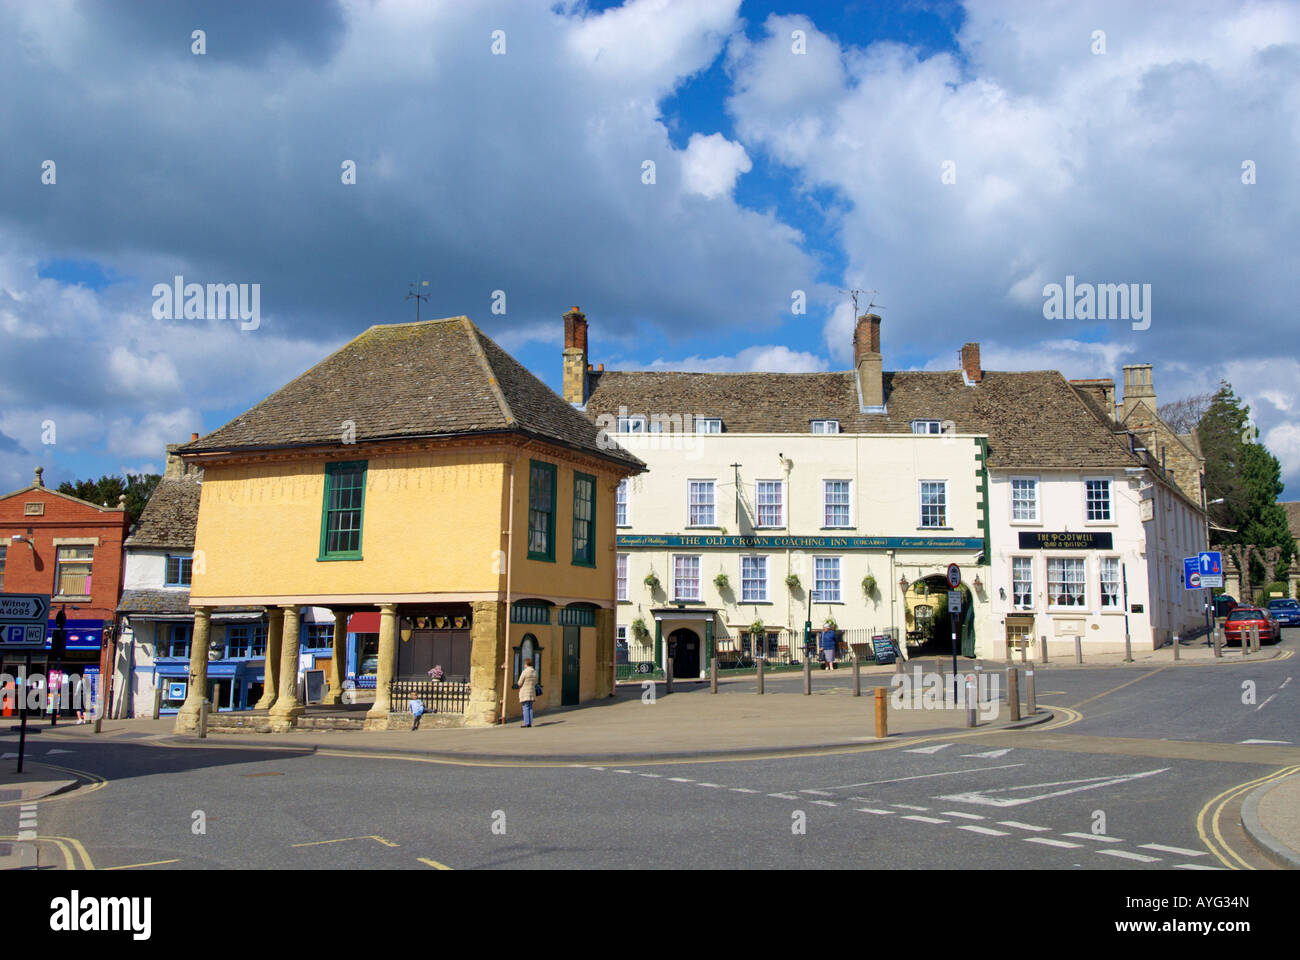 The Old Town Hall and Market Square, Faringdon, Oxfordshire, England Stock Photo